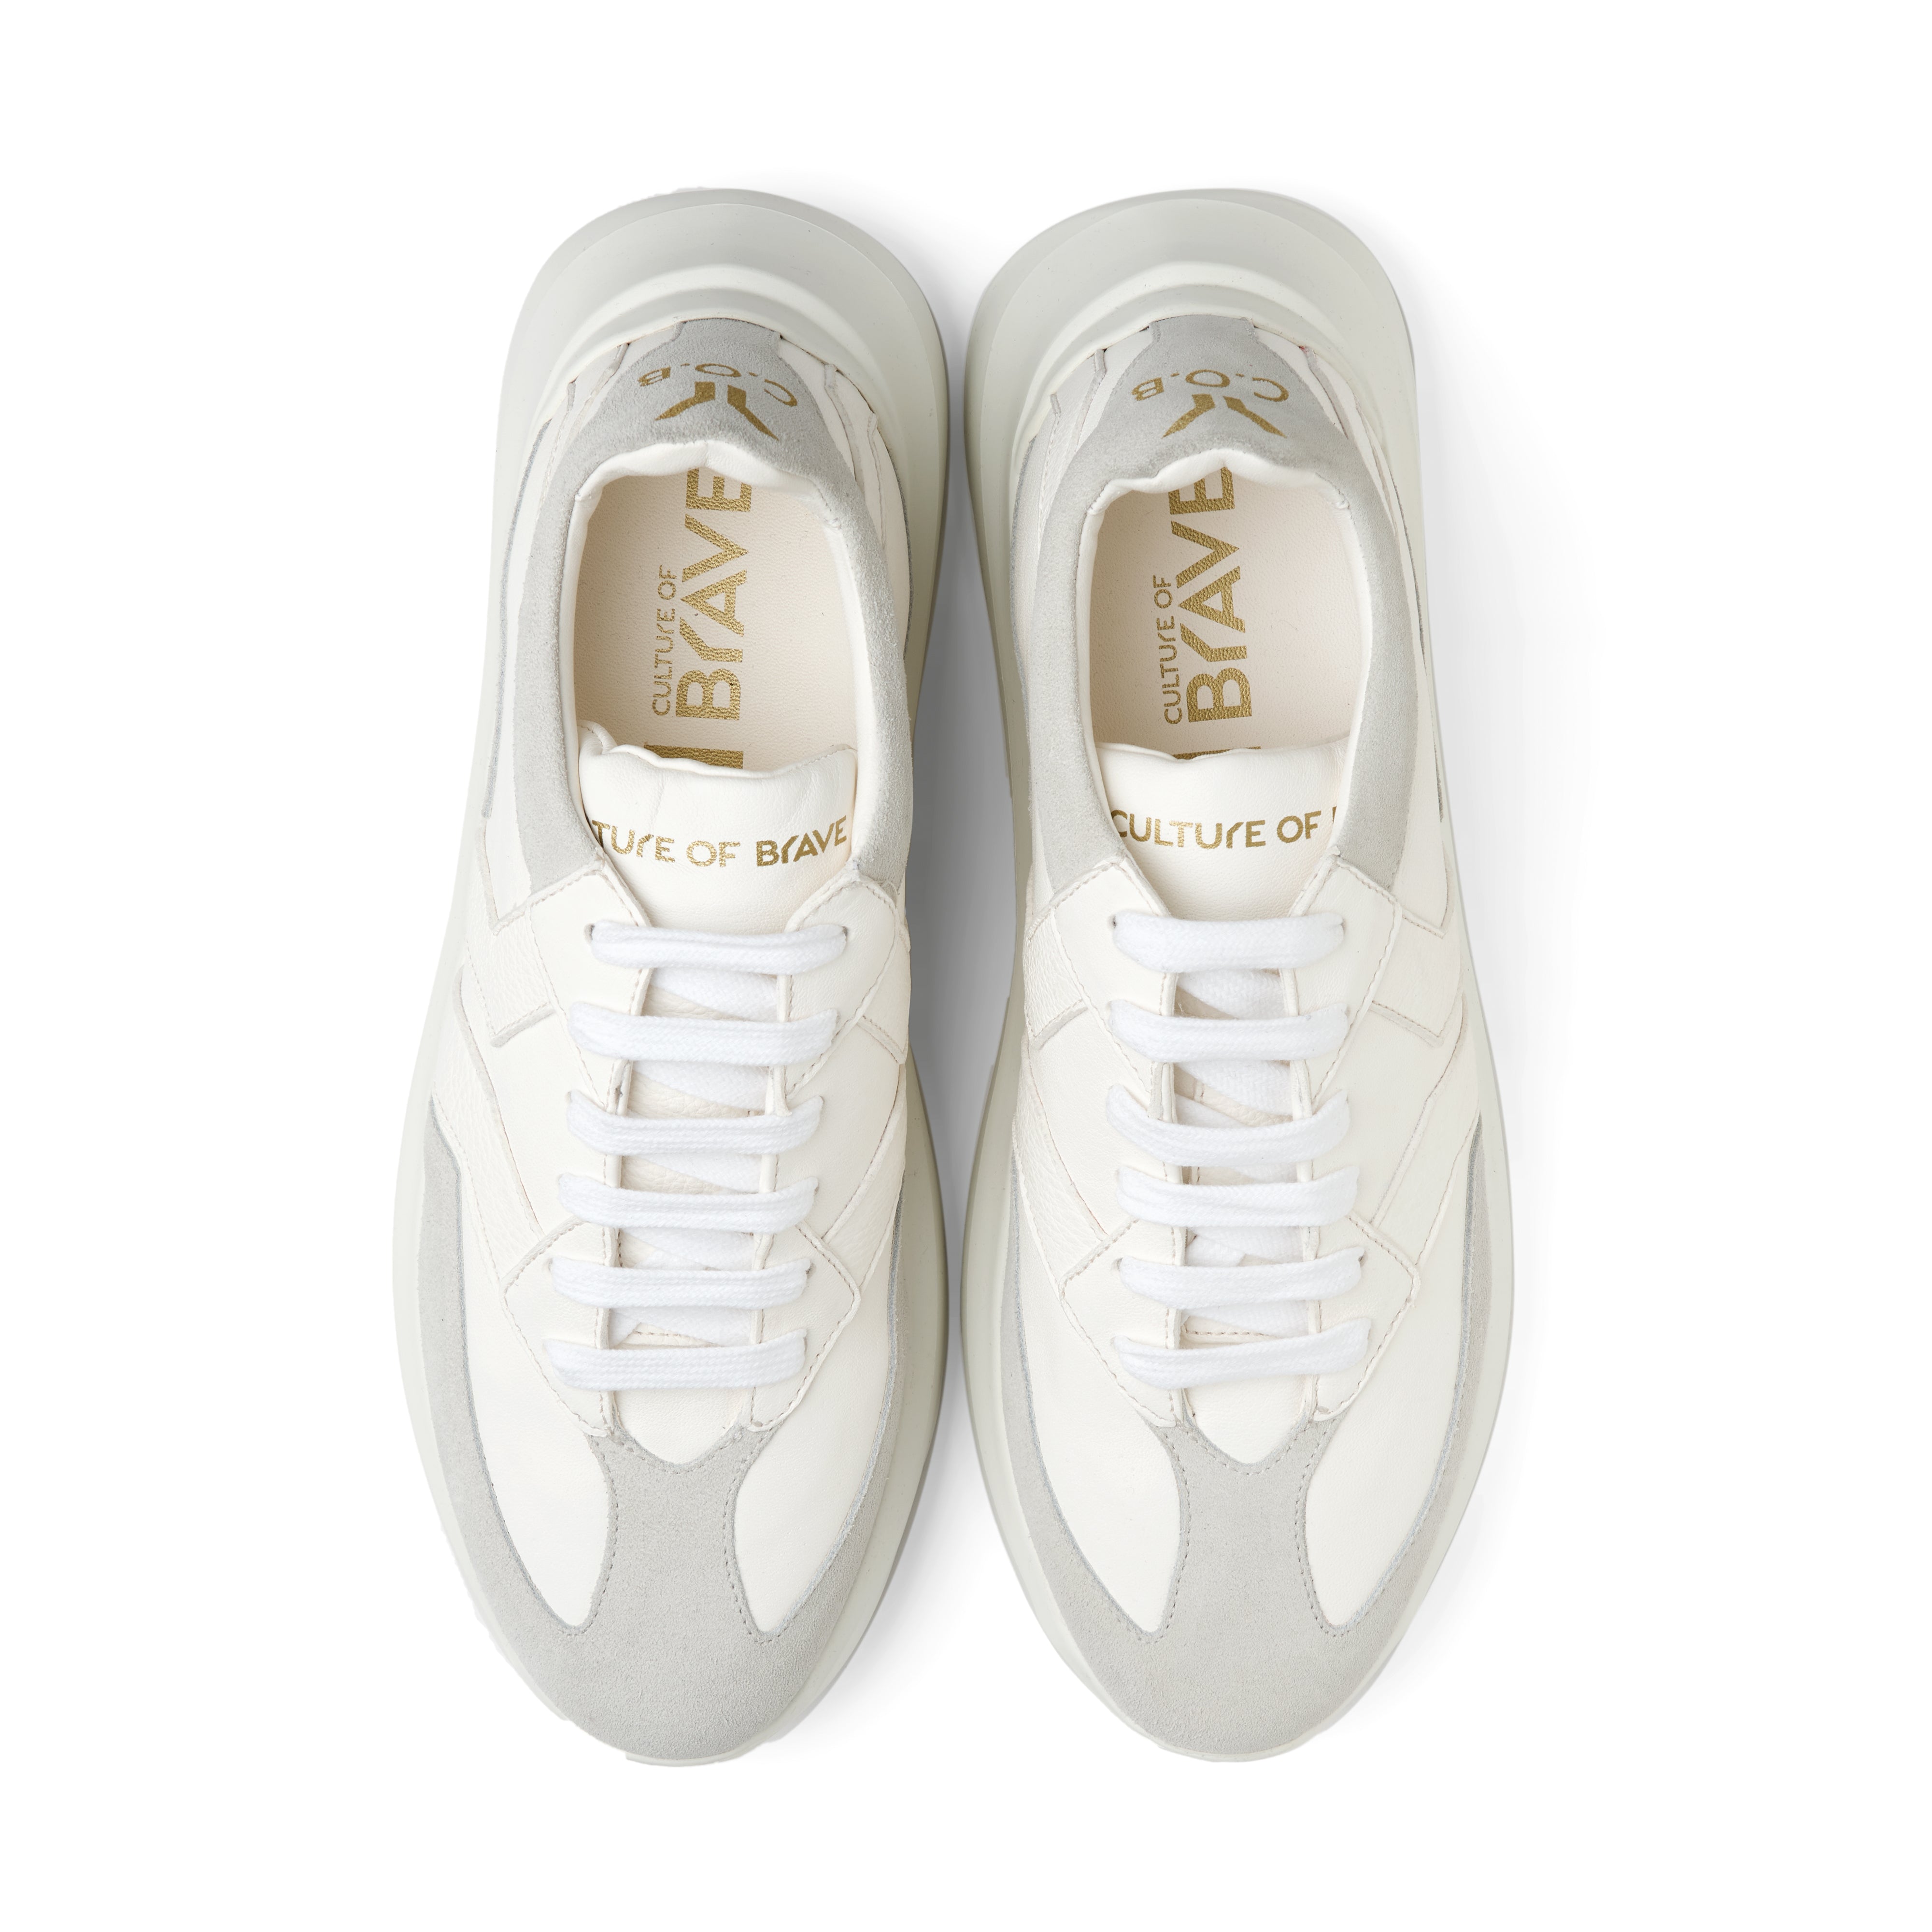 Free Soul_1 Women Offwhite leather offwhite wing low cut